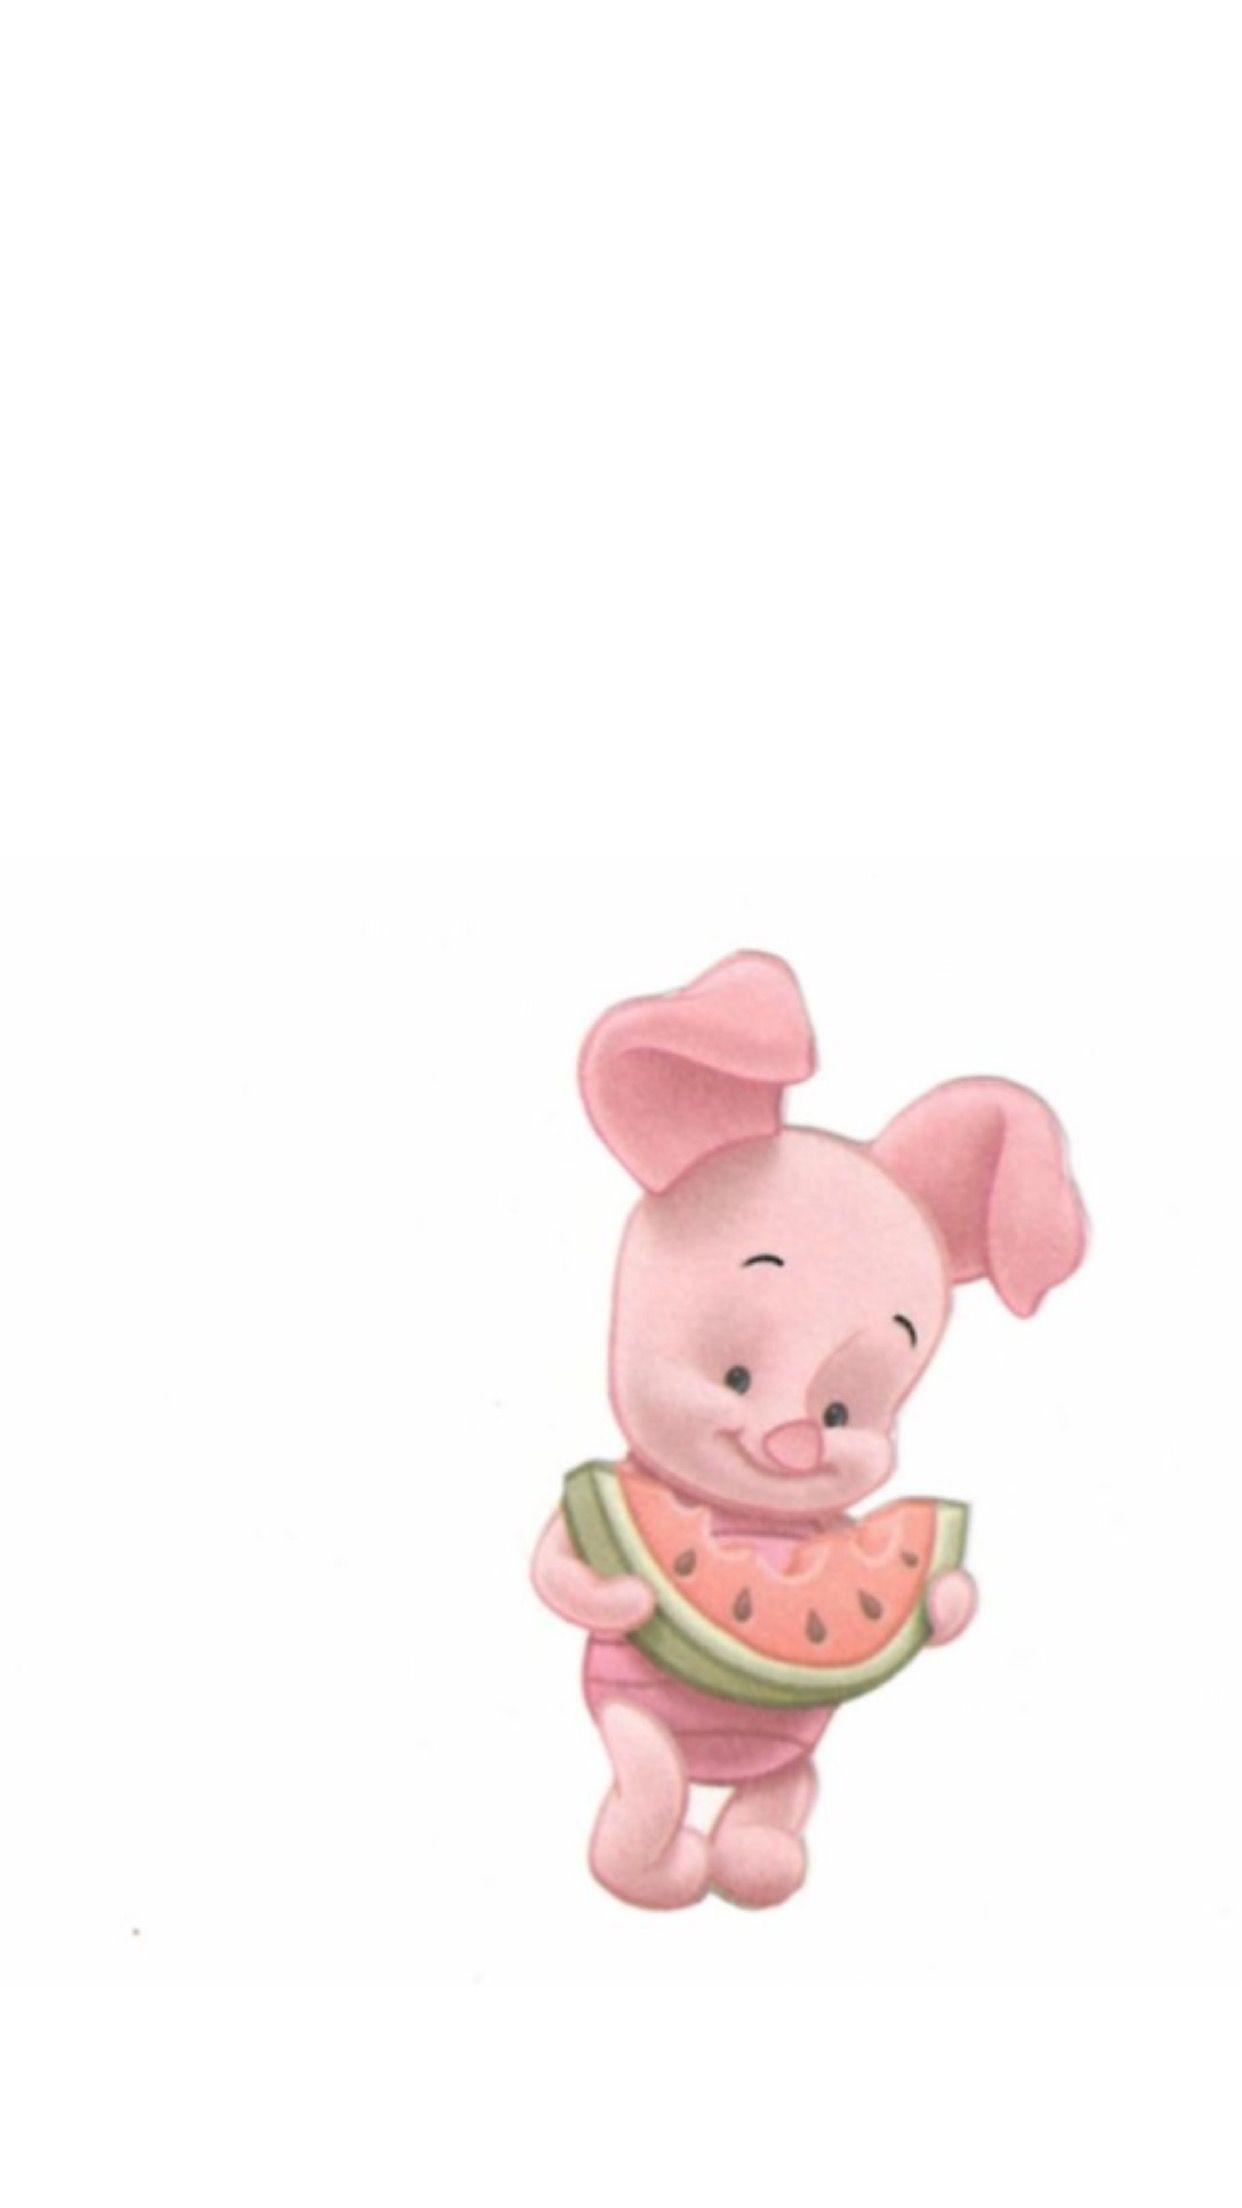 This is so cute and adorable, I love this drawing of Piglet